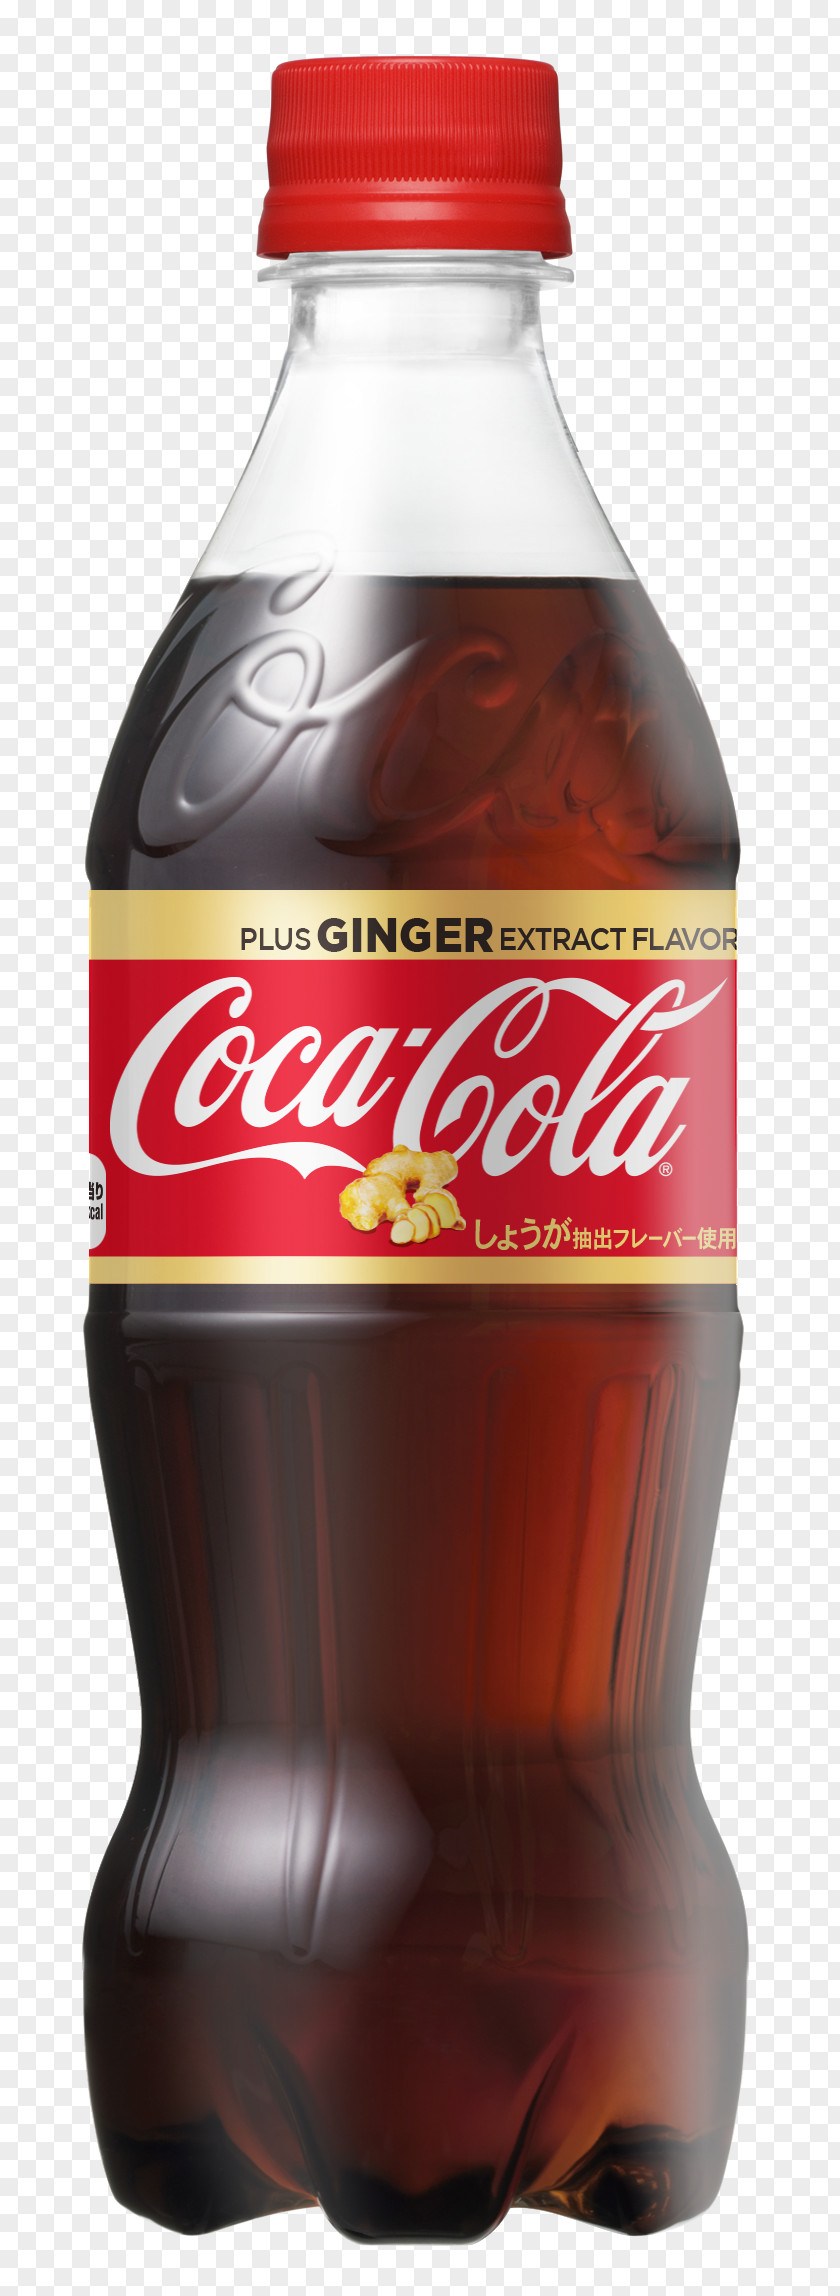 News Center Coca-Cola Cherry Fizzy Drinks Glass Bottle PNG